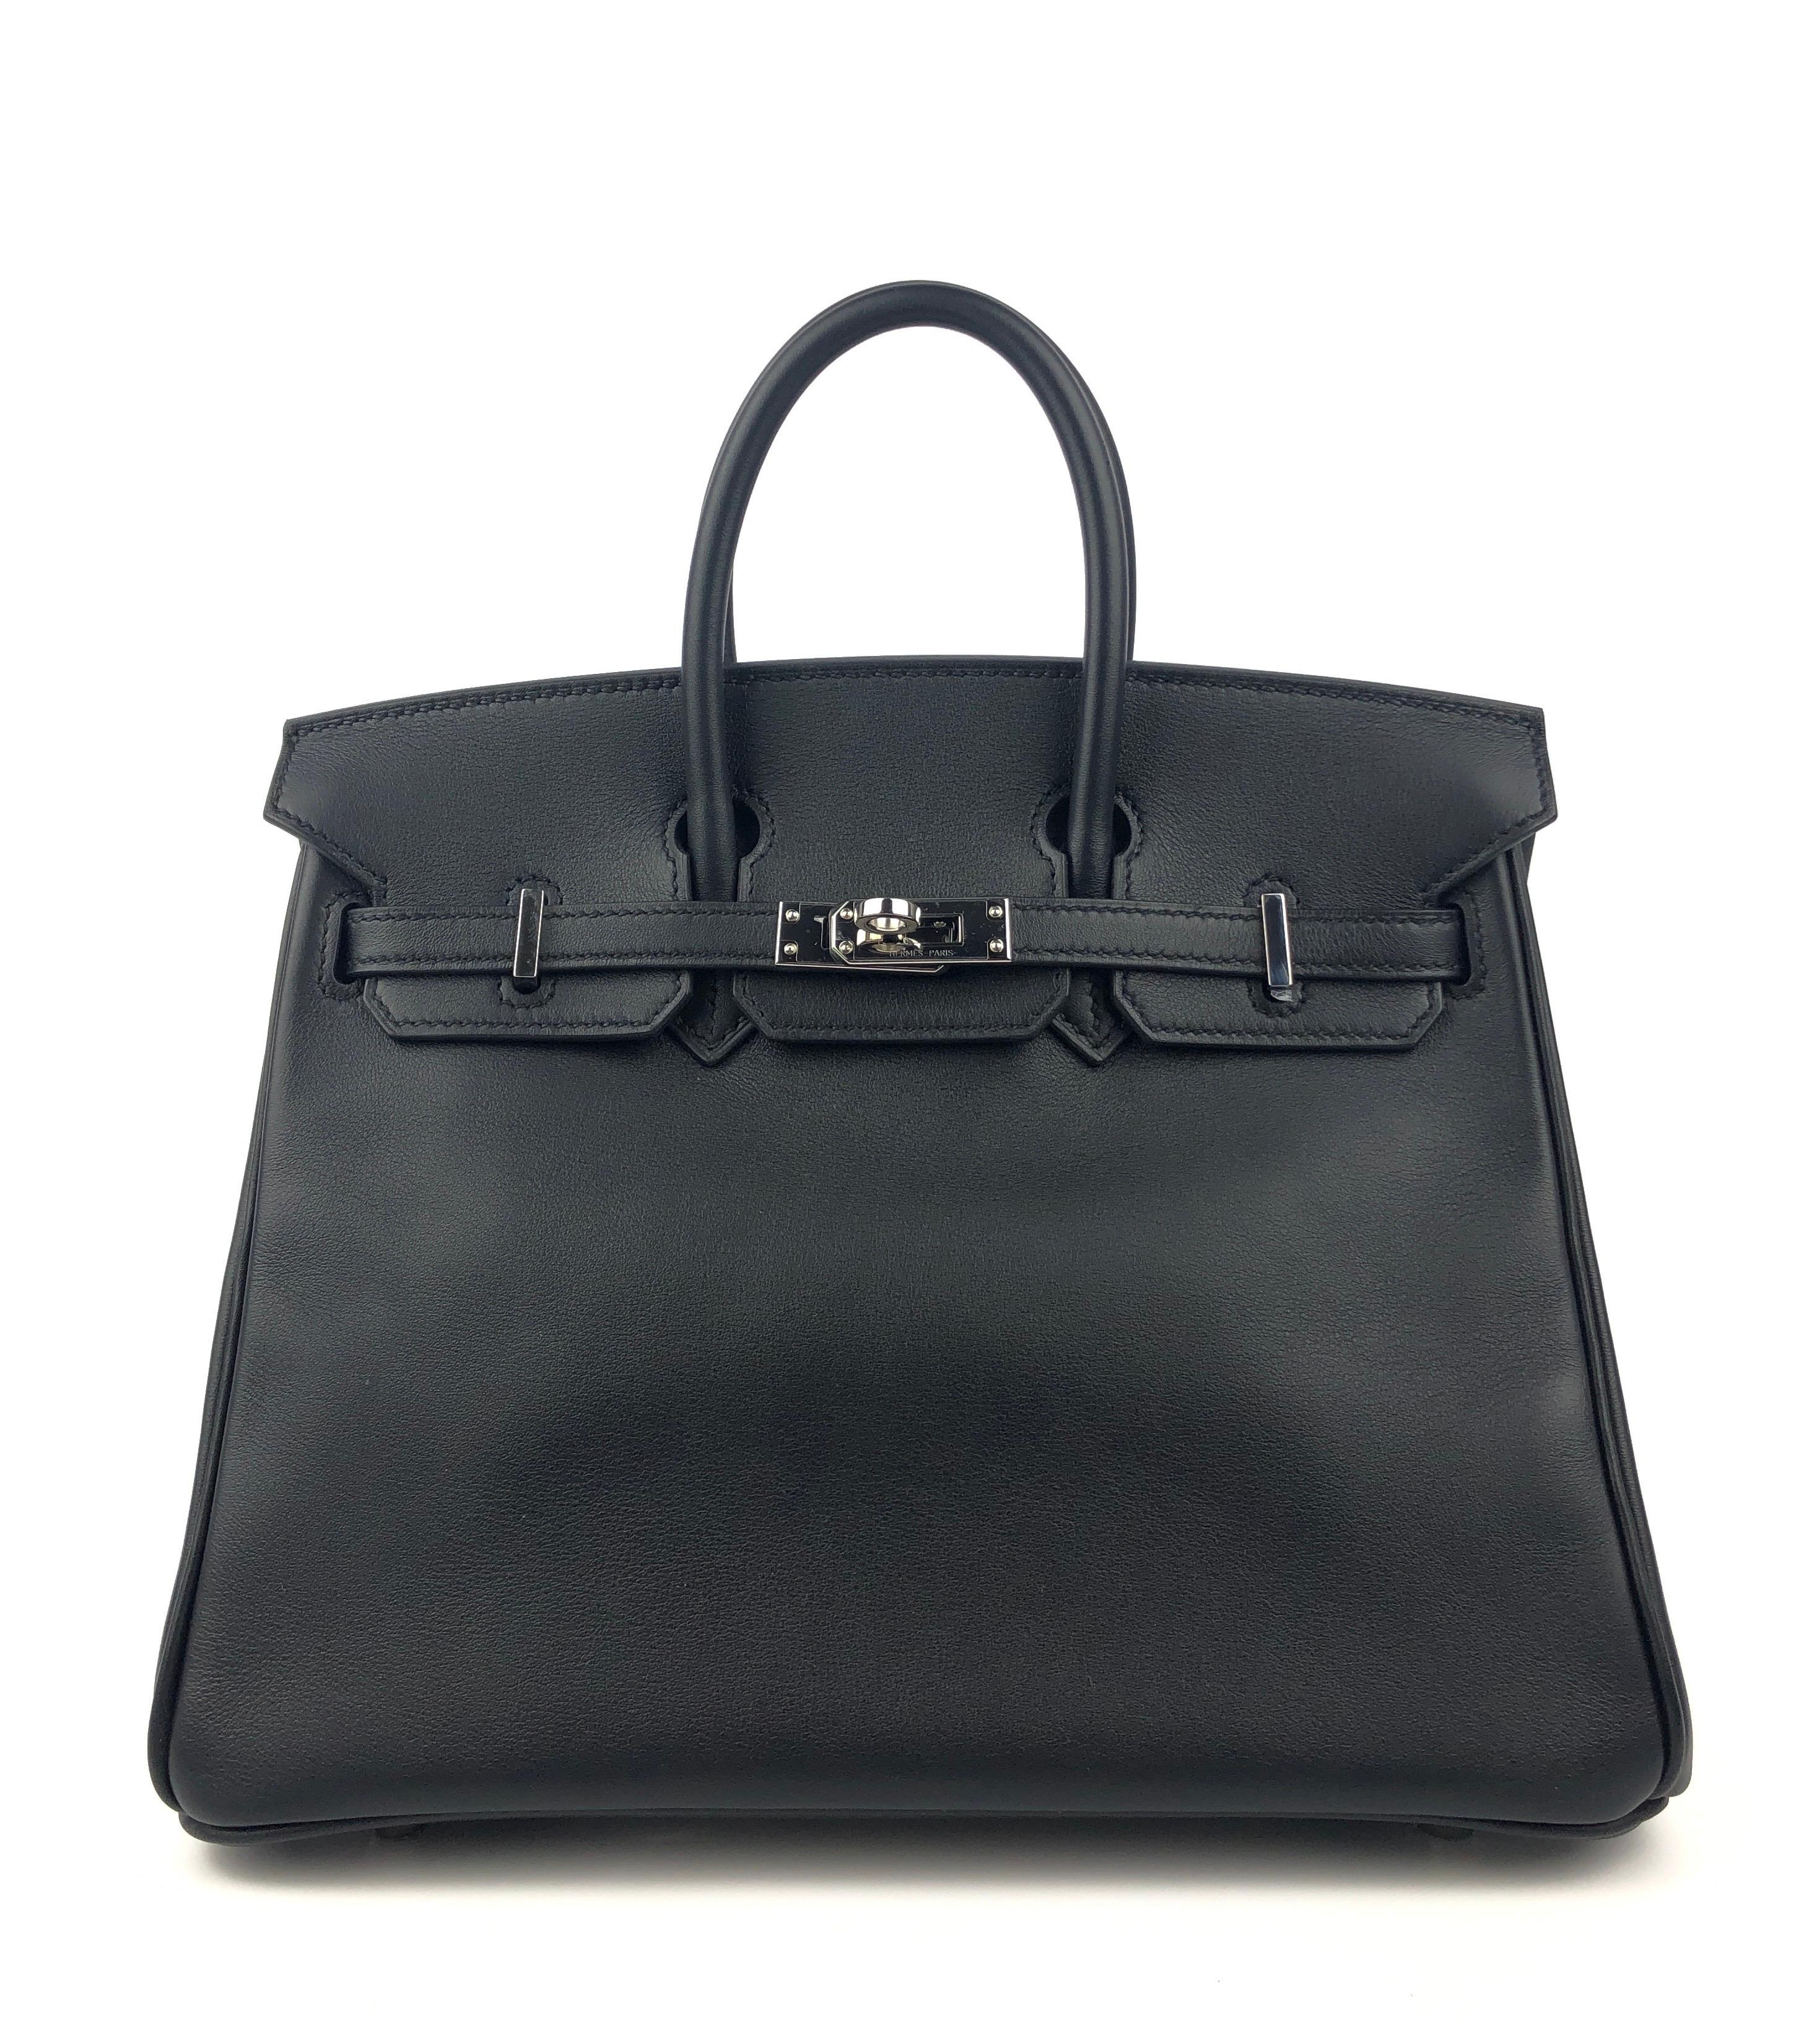 Stunning Hermes Birkin 25 Black Noir Swift Leather Palladium Hardware. Pristine Almost Like New with Plastic on Hardware and Feet. 2017 A Stamp. 

Shop with Confidence from Lux Addicts. Authenticity Guaranteed! 